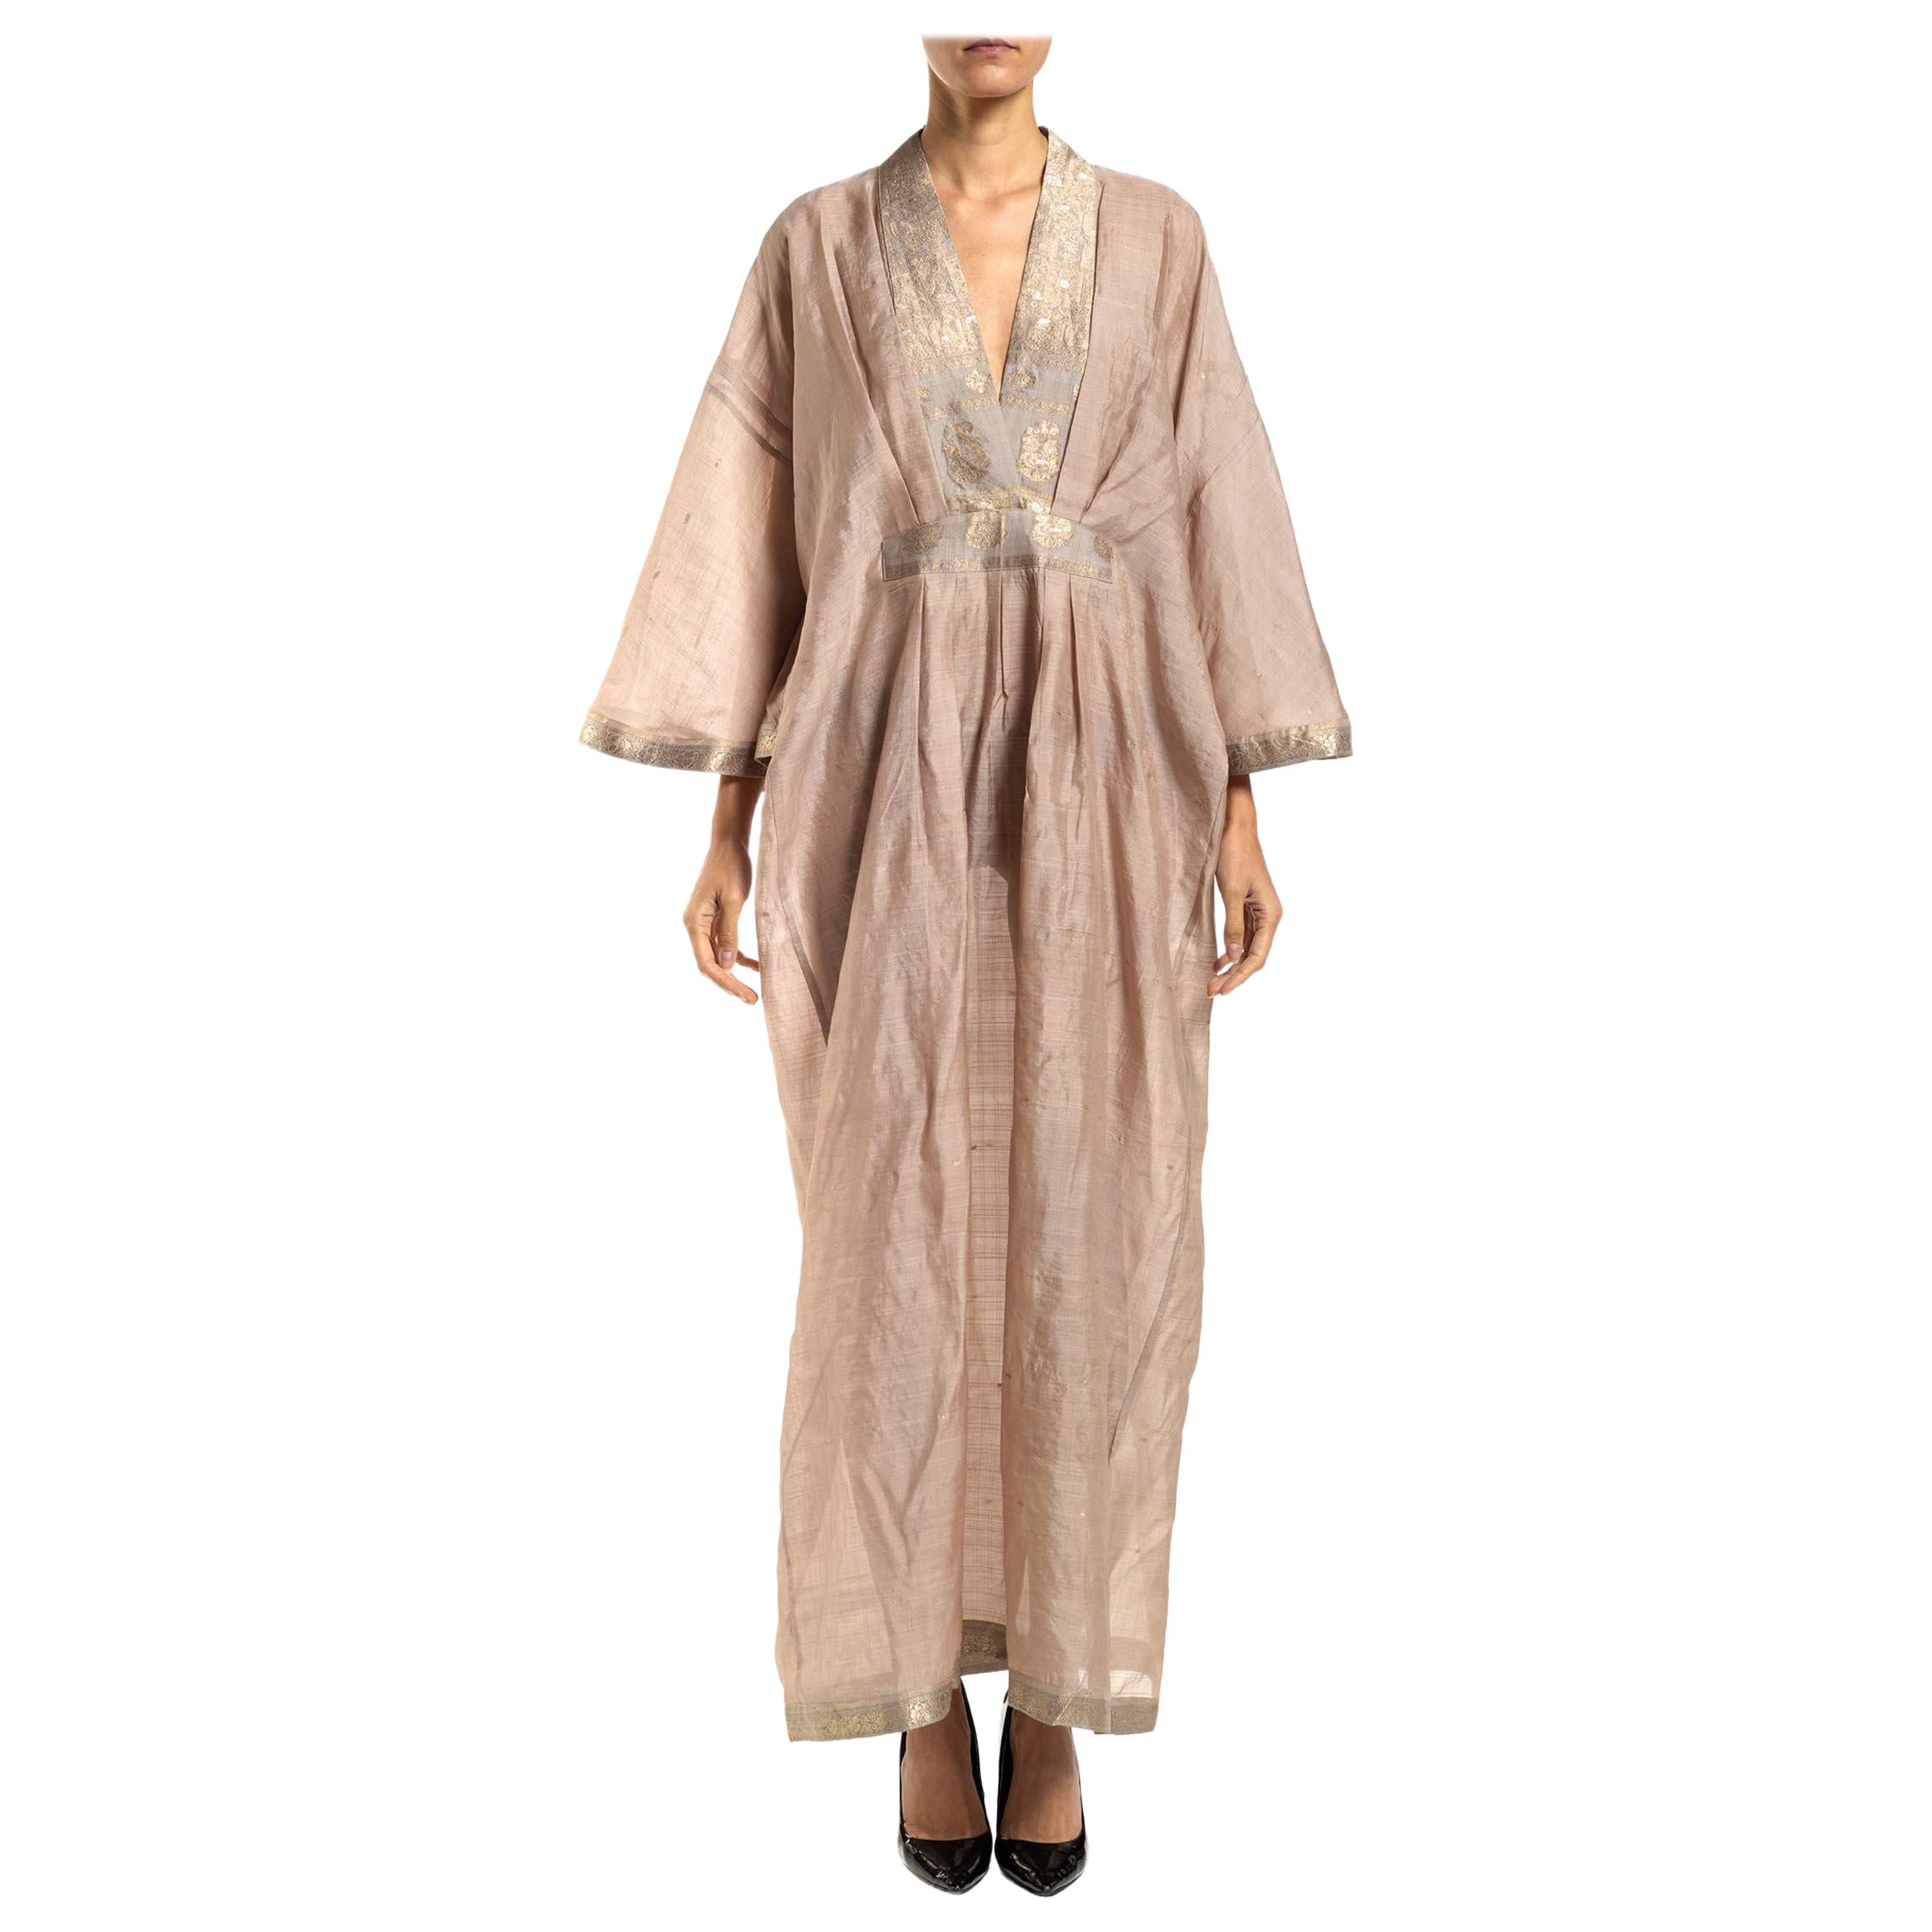 MORPHEW COLLECTION Dusty Pink Silk Kaftan Made From Vintage Sari For Sale